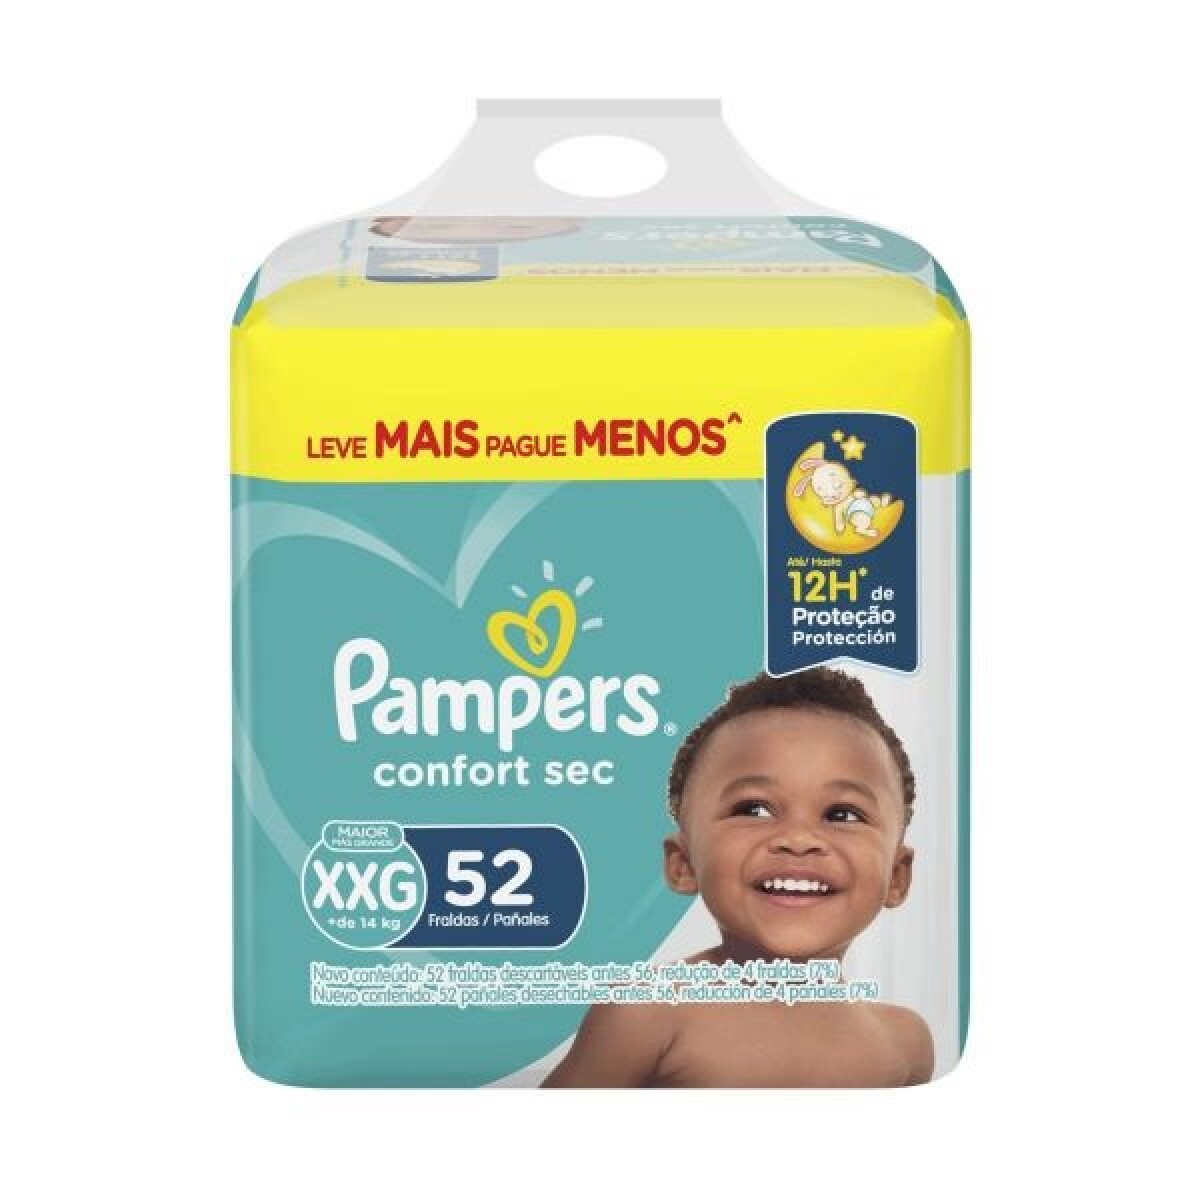 Pañales Pampers Confort Sec Talle Xxg 52 Uds. 